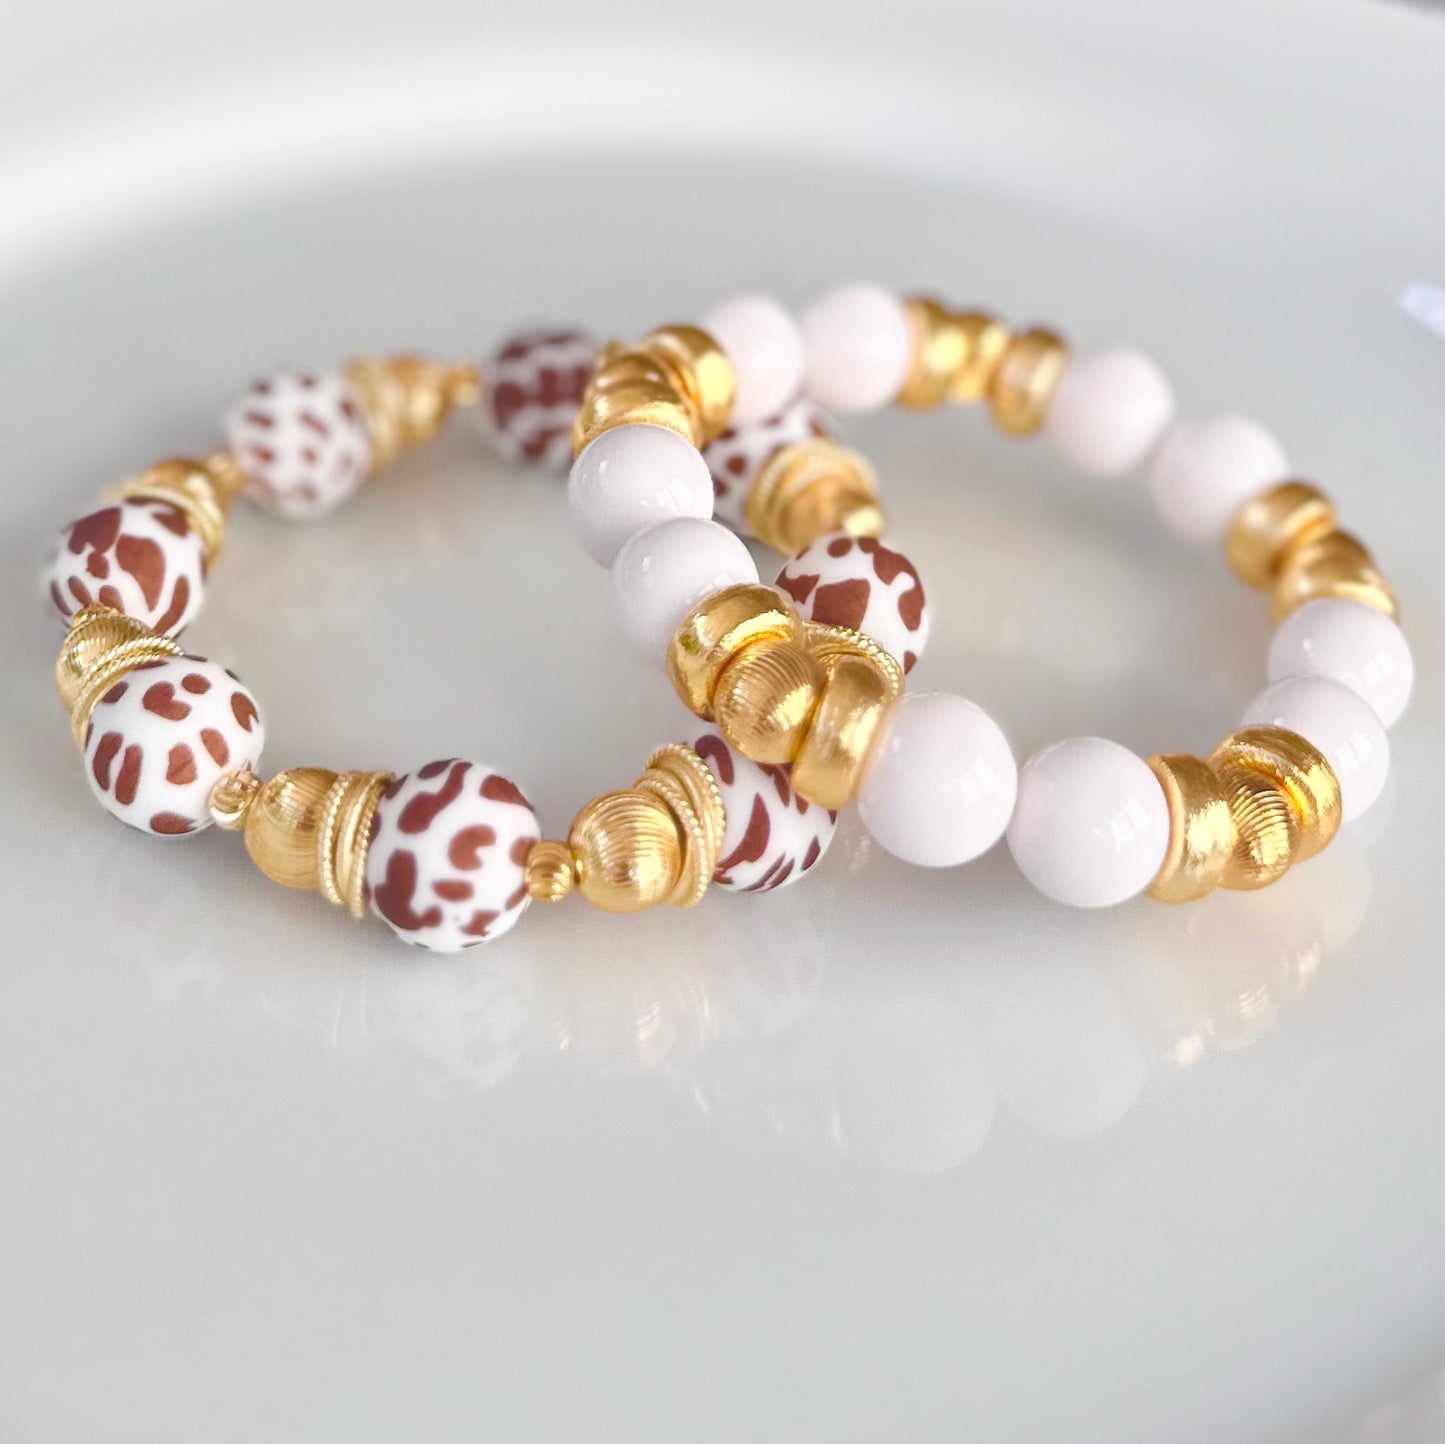 BROWN AND WHITE COW PATTERN BANGLE WITH GOLD ACCENTS